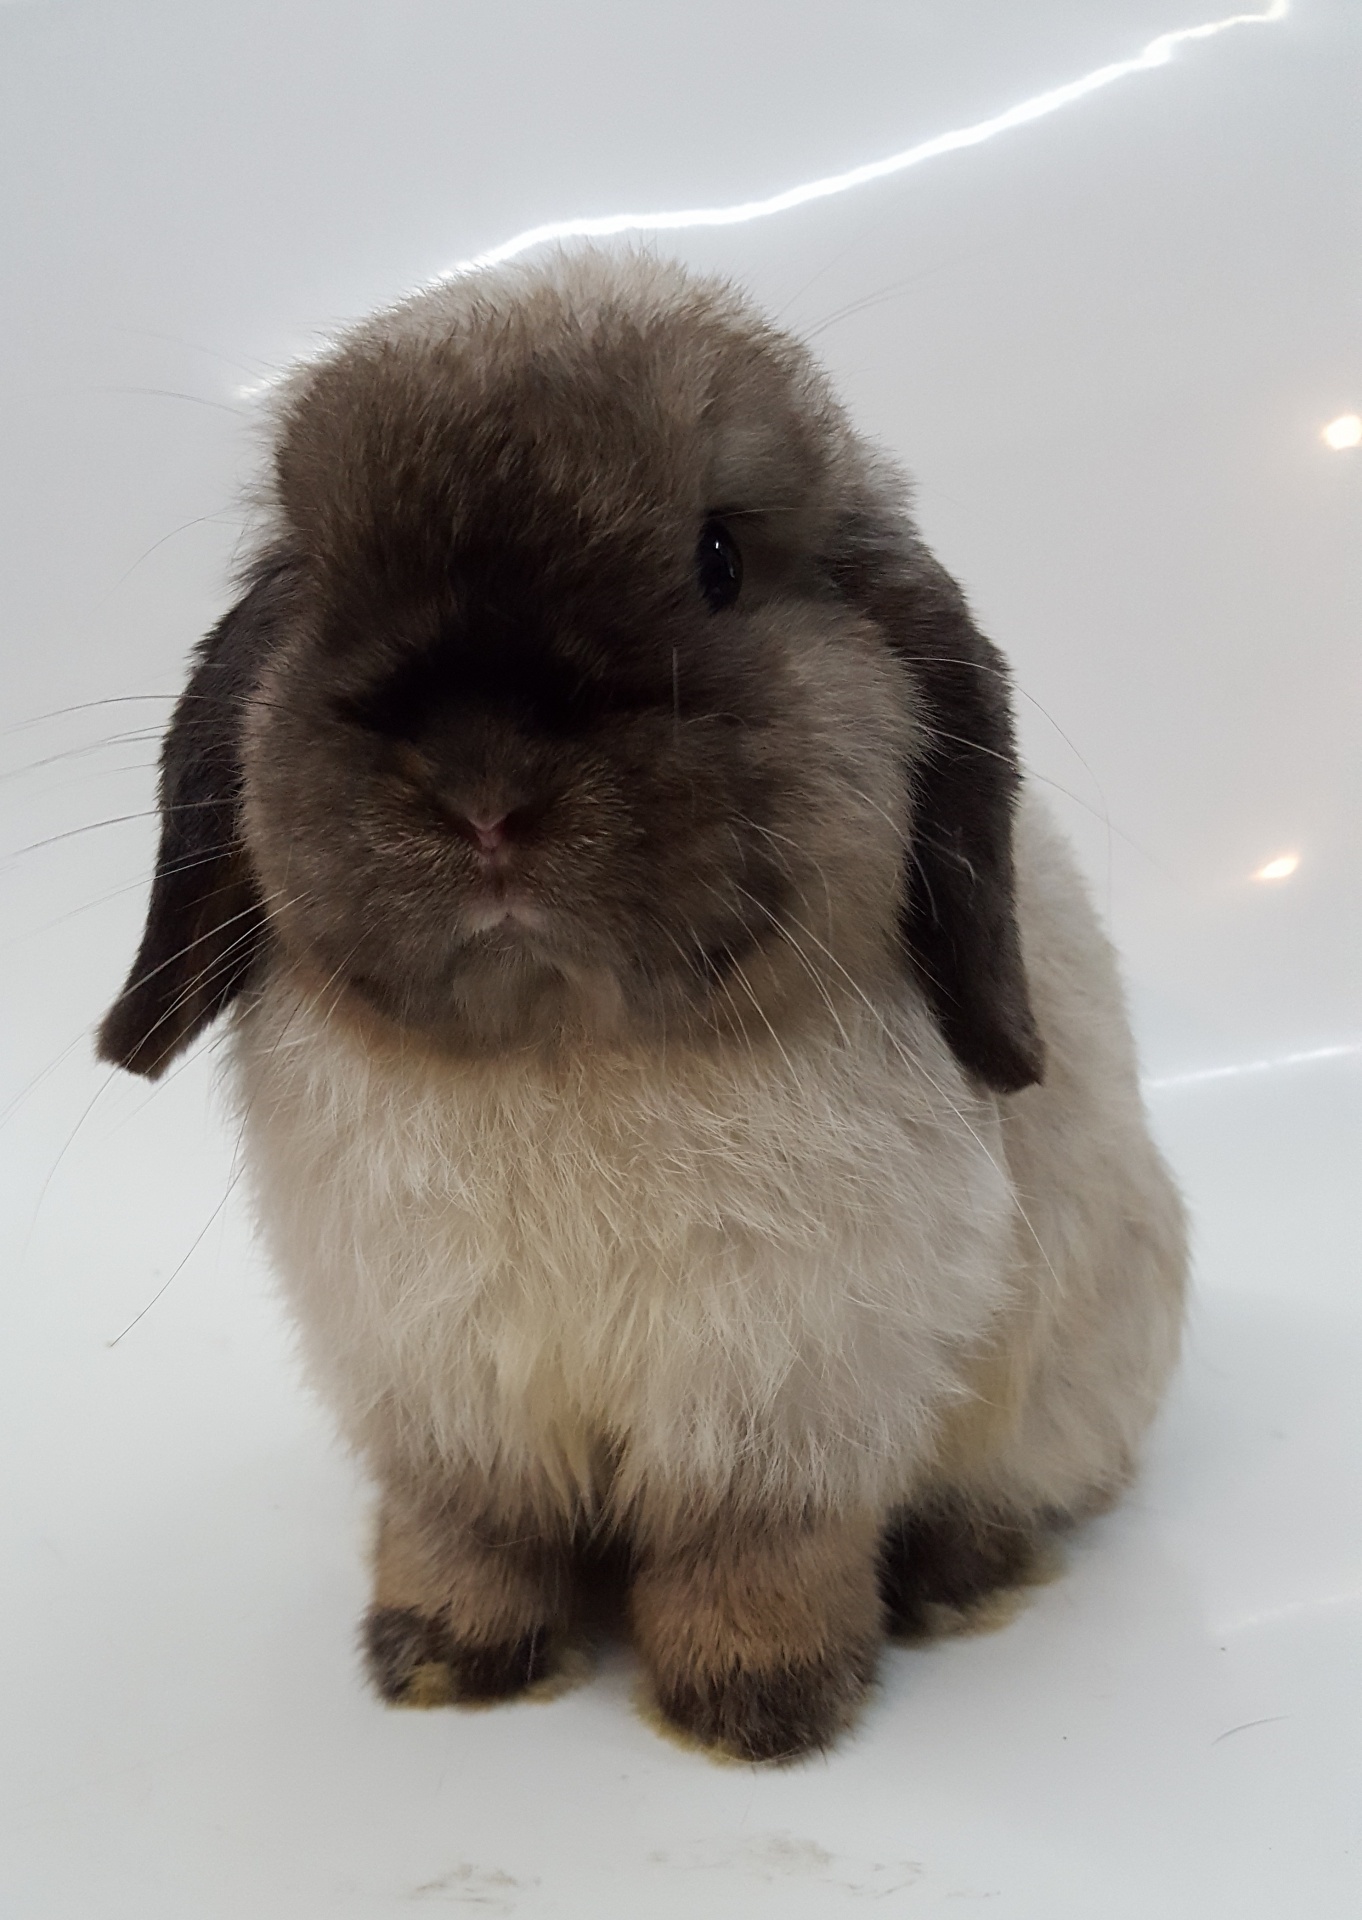 Edit free photo of Holland lop,rabbit,sable point,holland lop rabbit